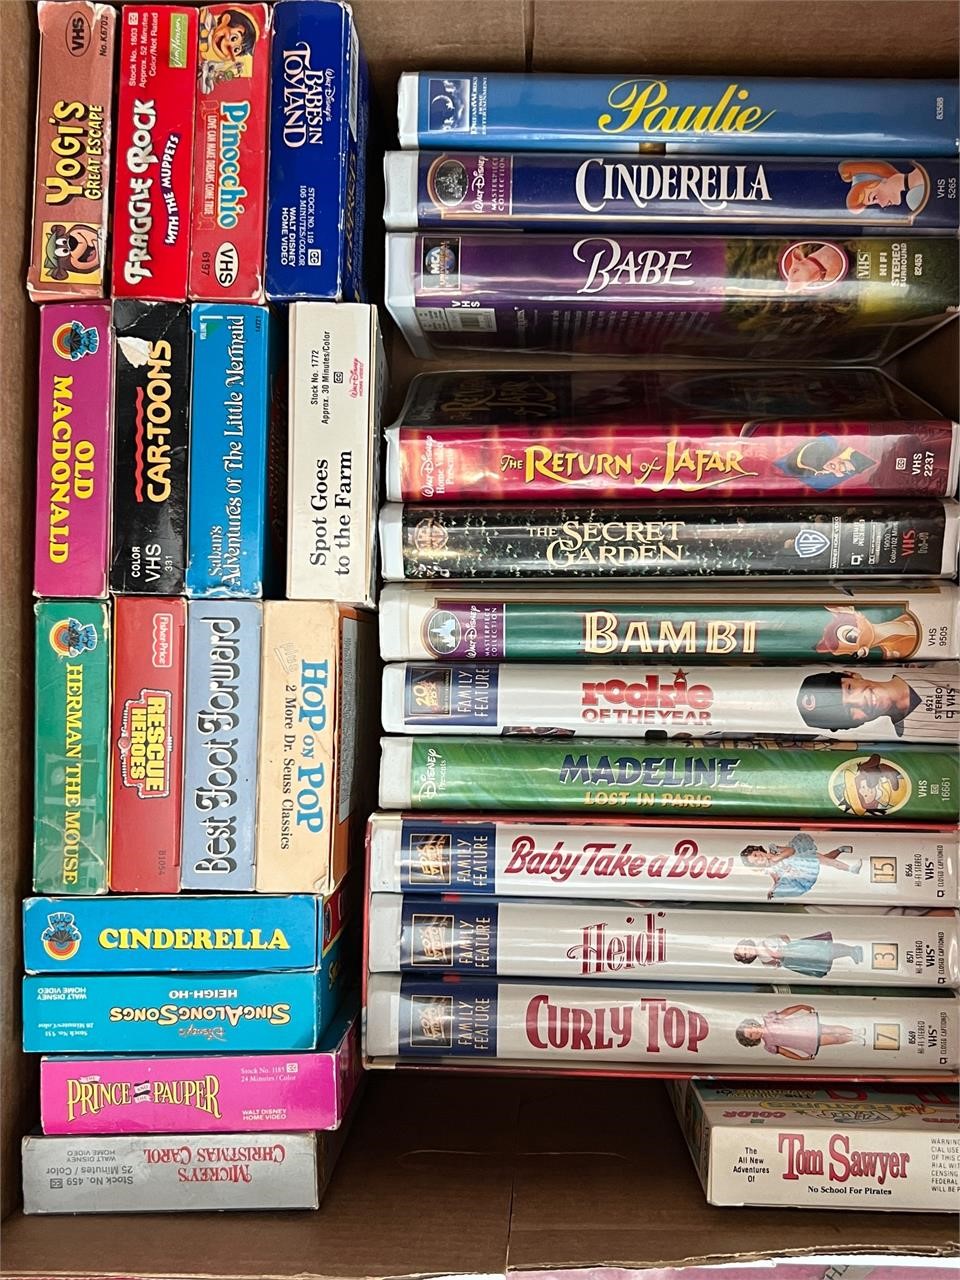 1980s/1990s Kids VHS Tapes